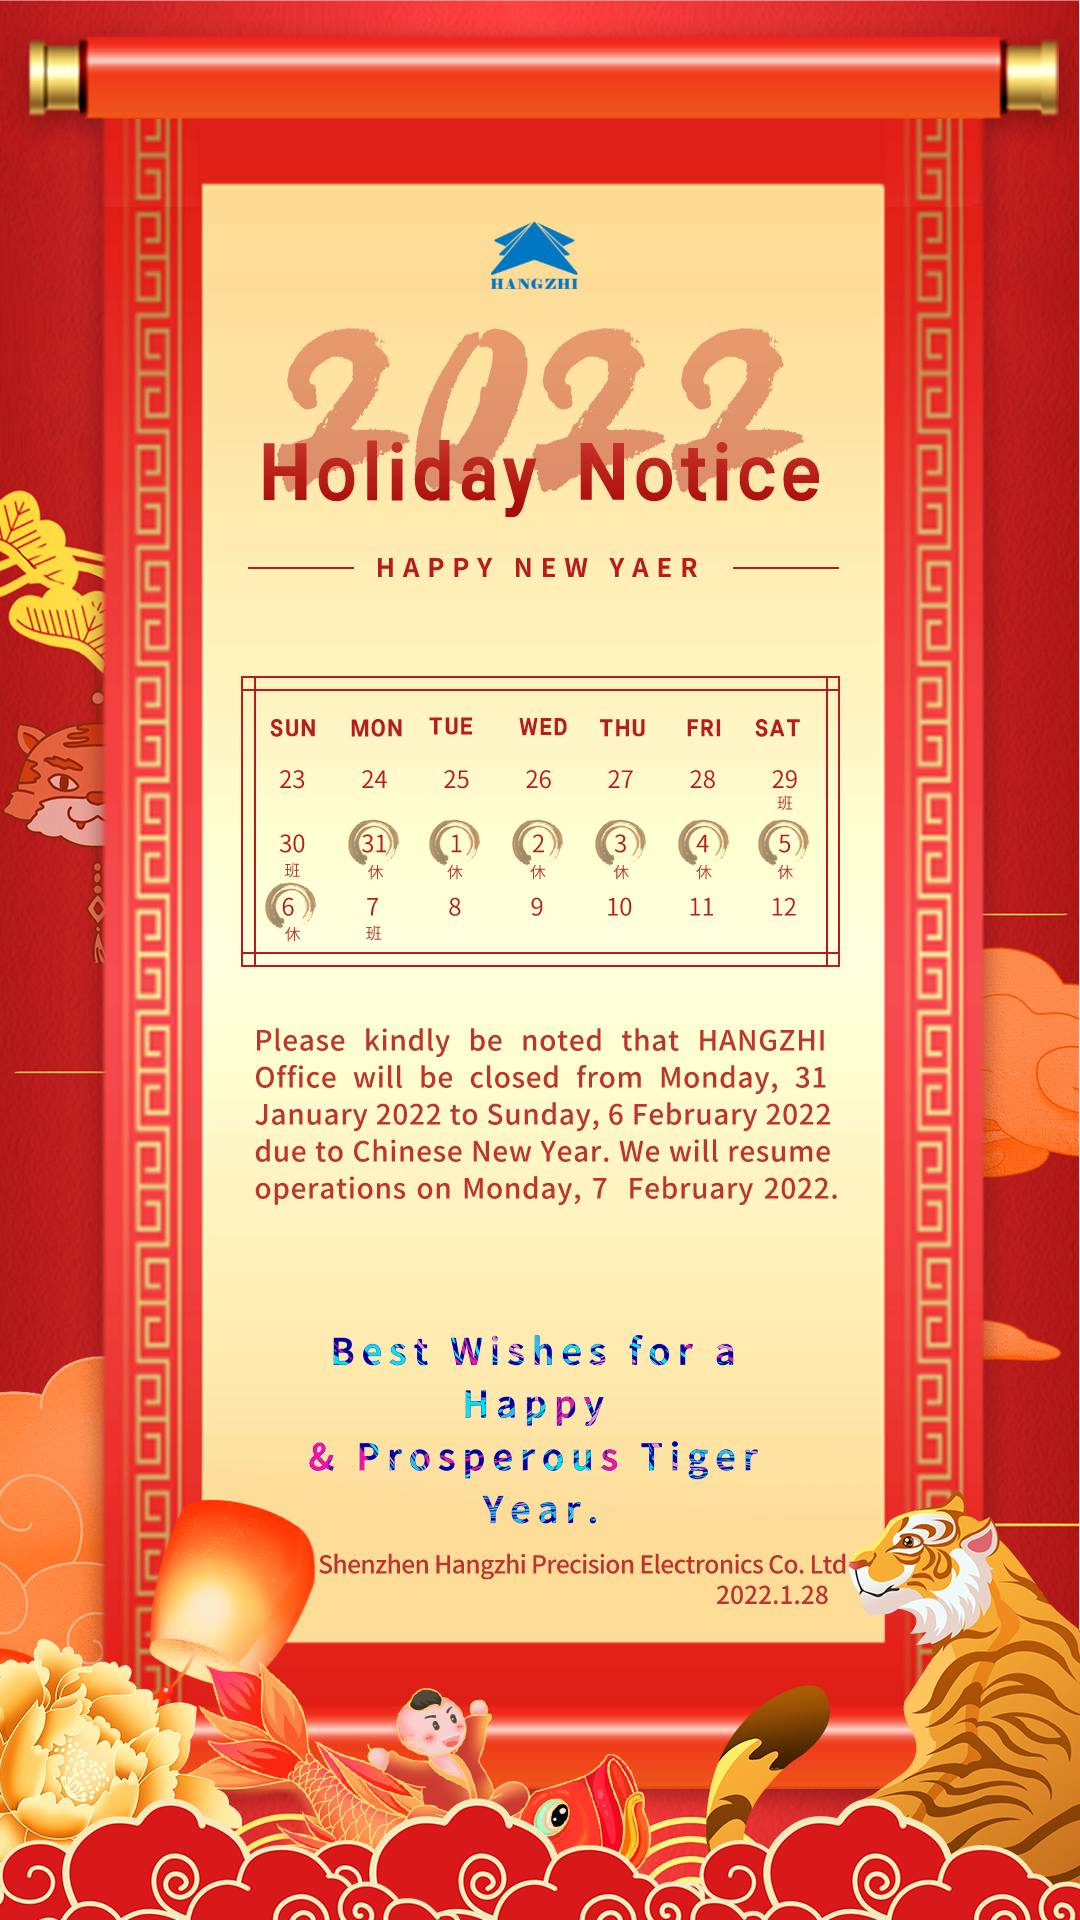 Happy and Good Luck in the Year of Tiger